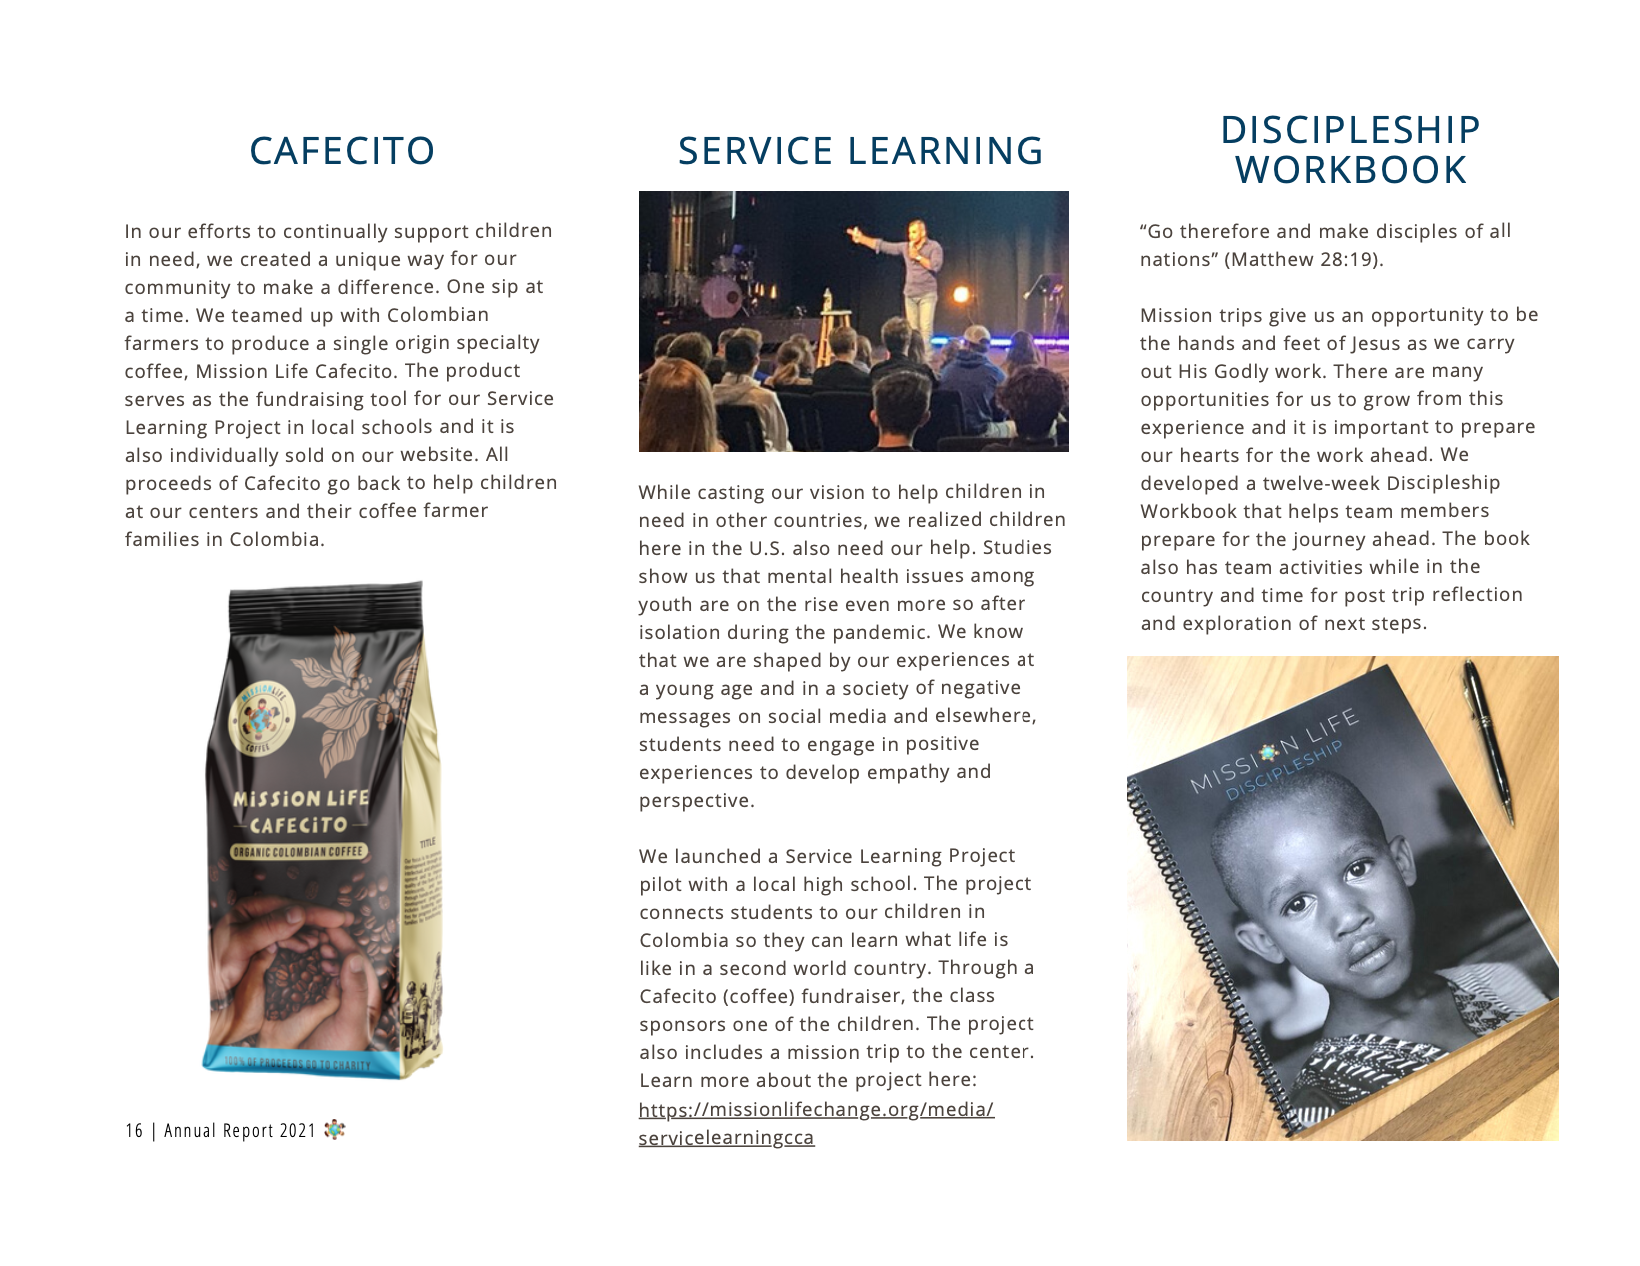 Mission Life_2021_Annual Report_P16.png